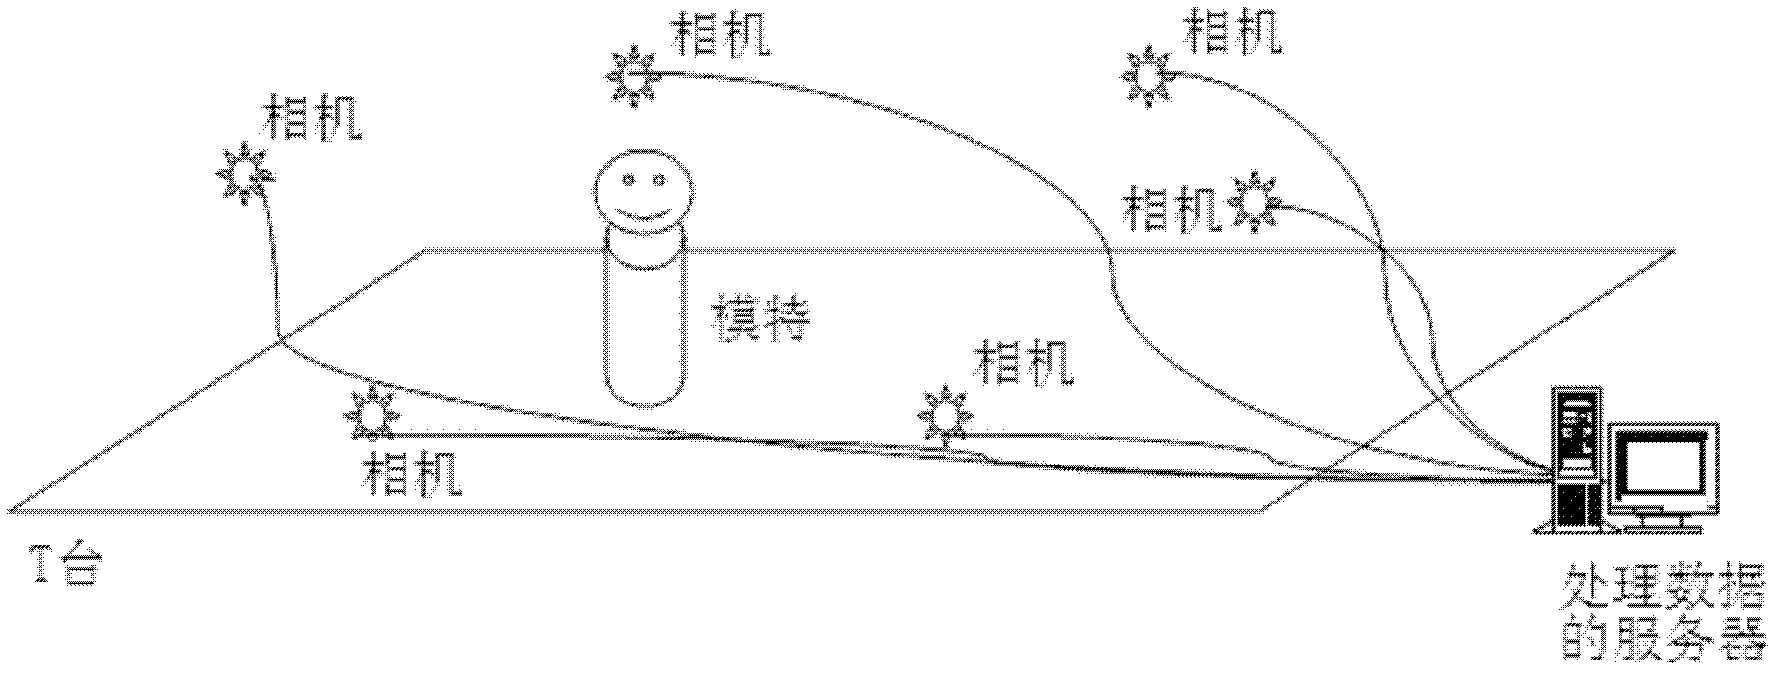 Garment showing method applied in electronic commerce